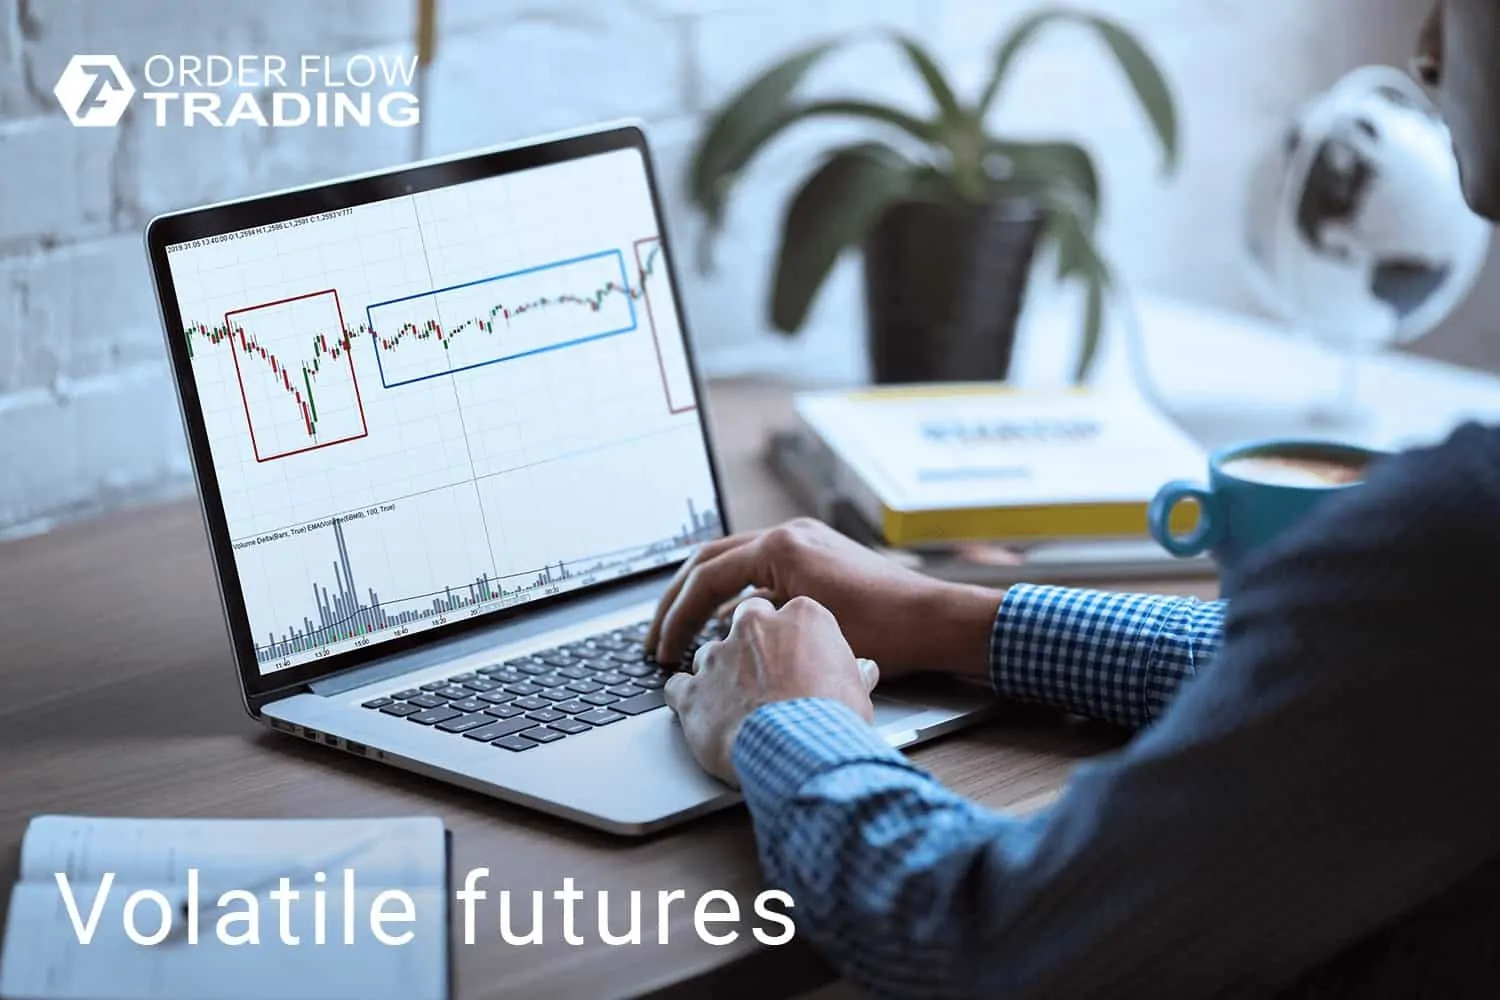 Volatile futures. What is it and how to make money from it?